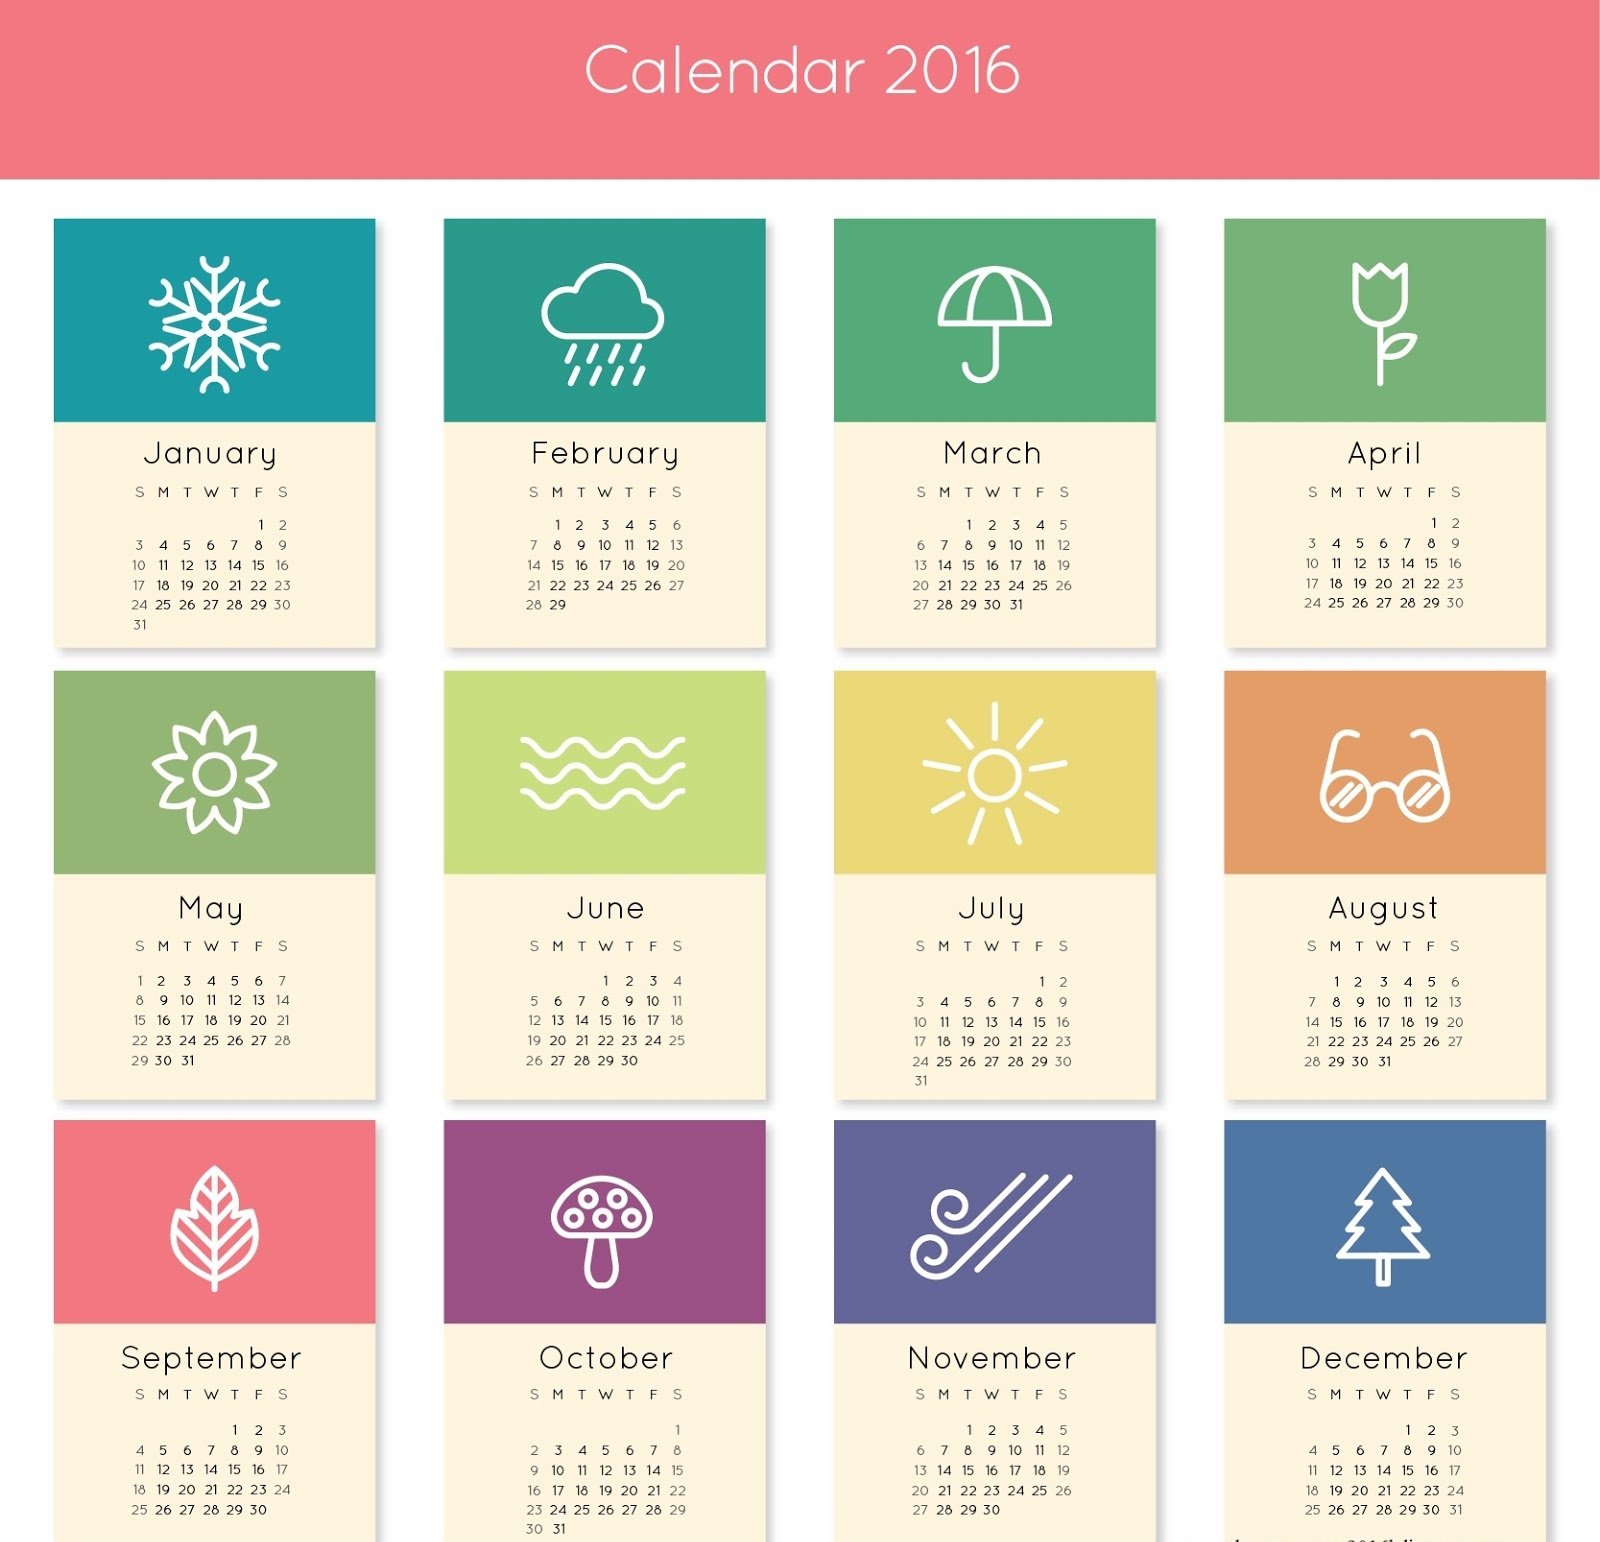 Happy New Year Calendar 2016   HD Wallpapers Backgrounds of Your